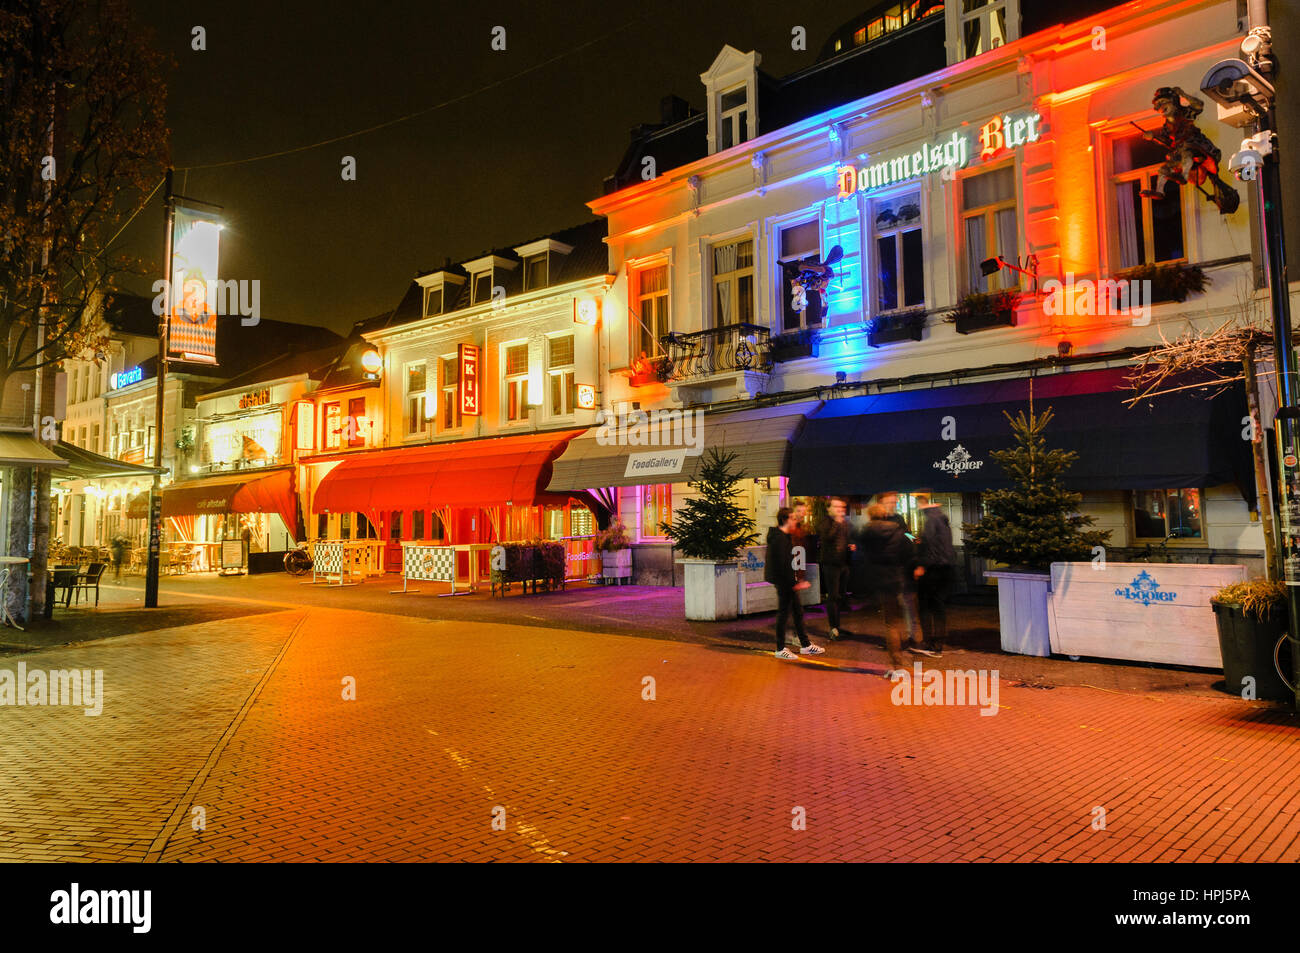 People outside a bar in Eindhoven, Netherlands, at night. Stock Photo